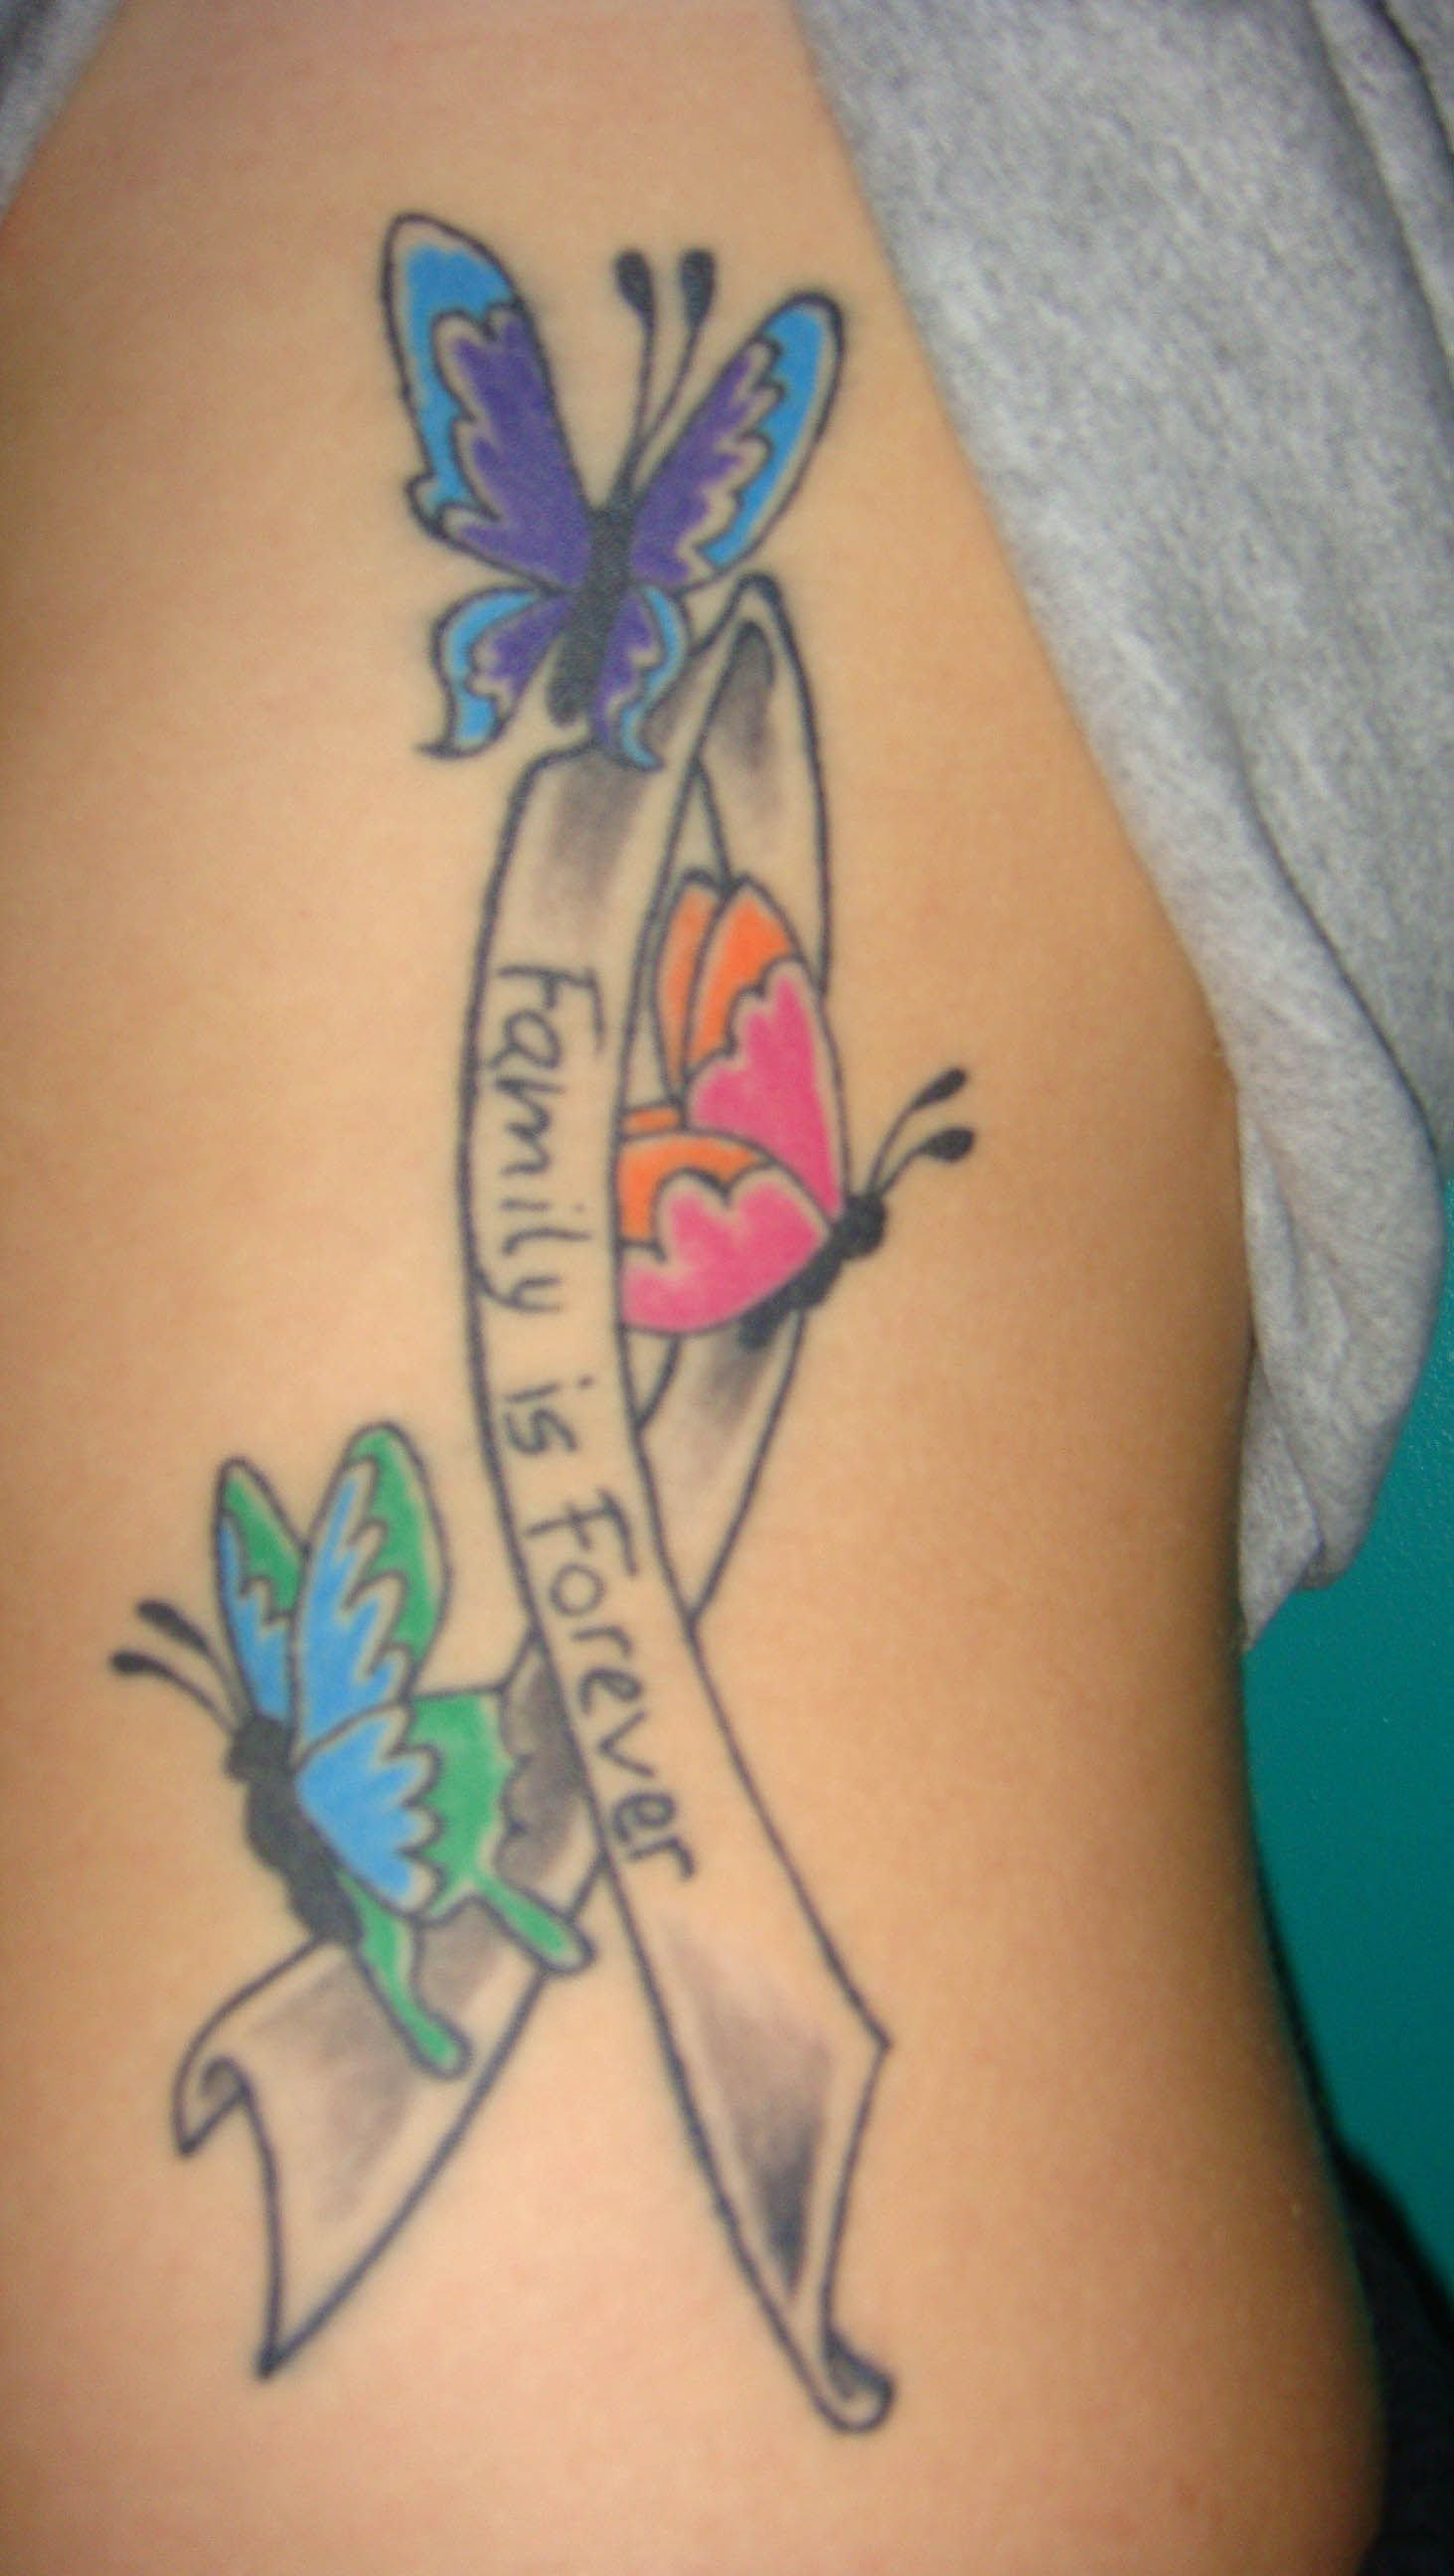 Pin Tattoo Design Ideas On Cancer Ribbon Tattoos Cancer Ribbon intended for dimensions 1463 X 2592